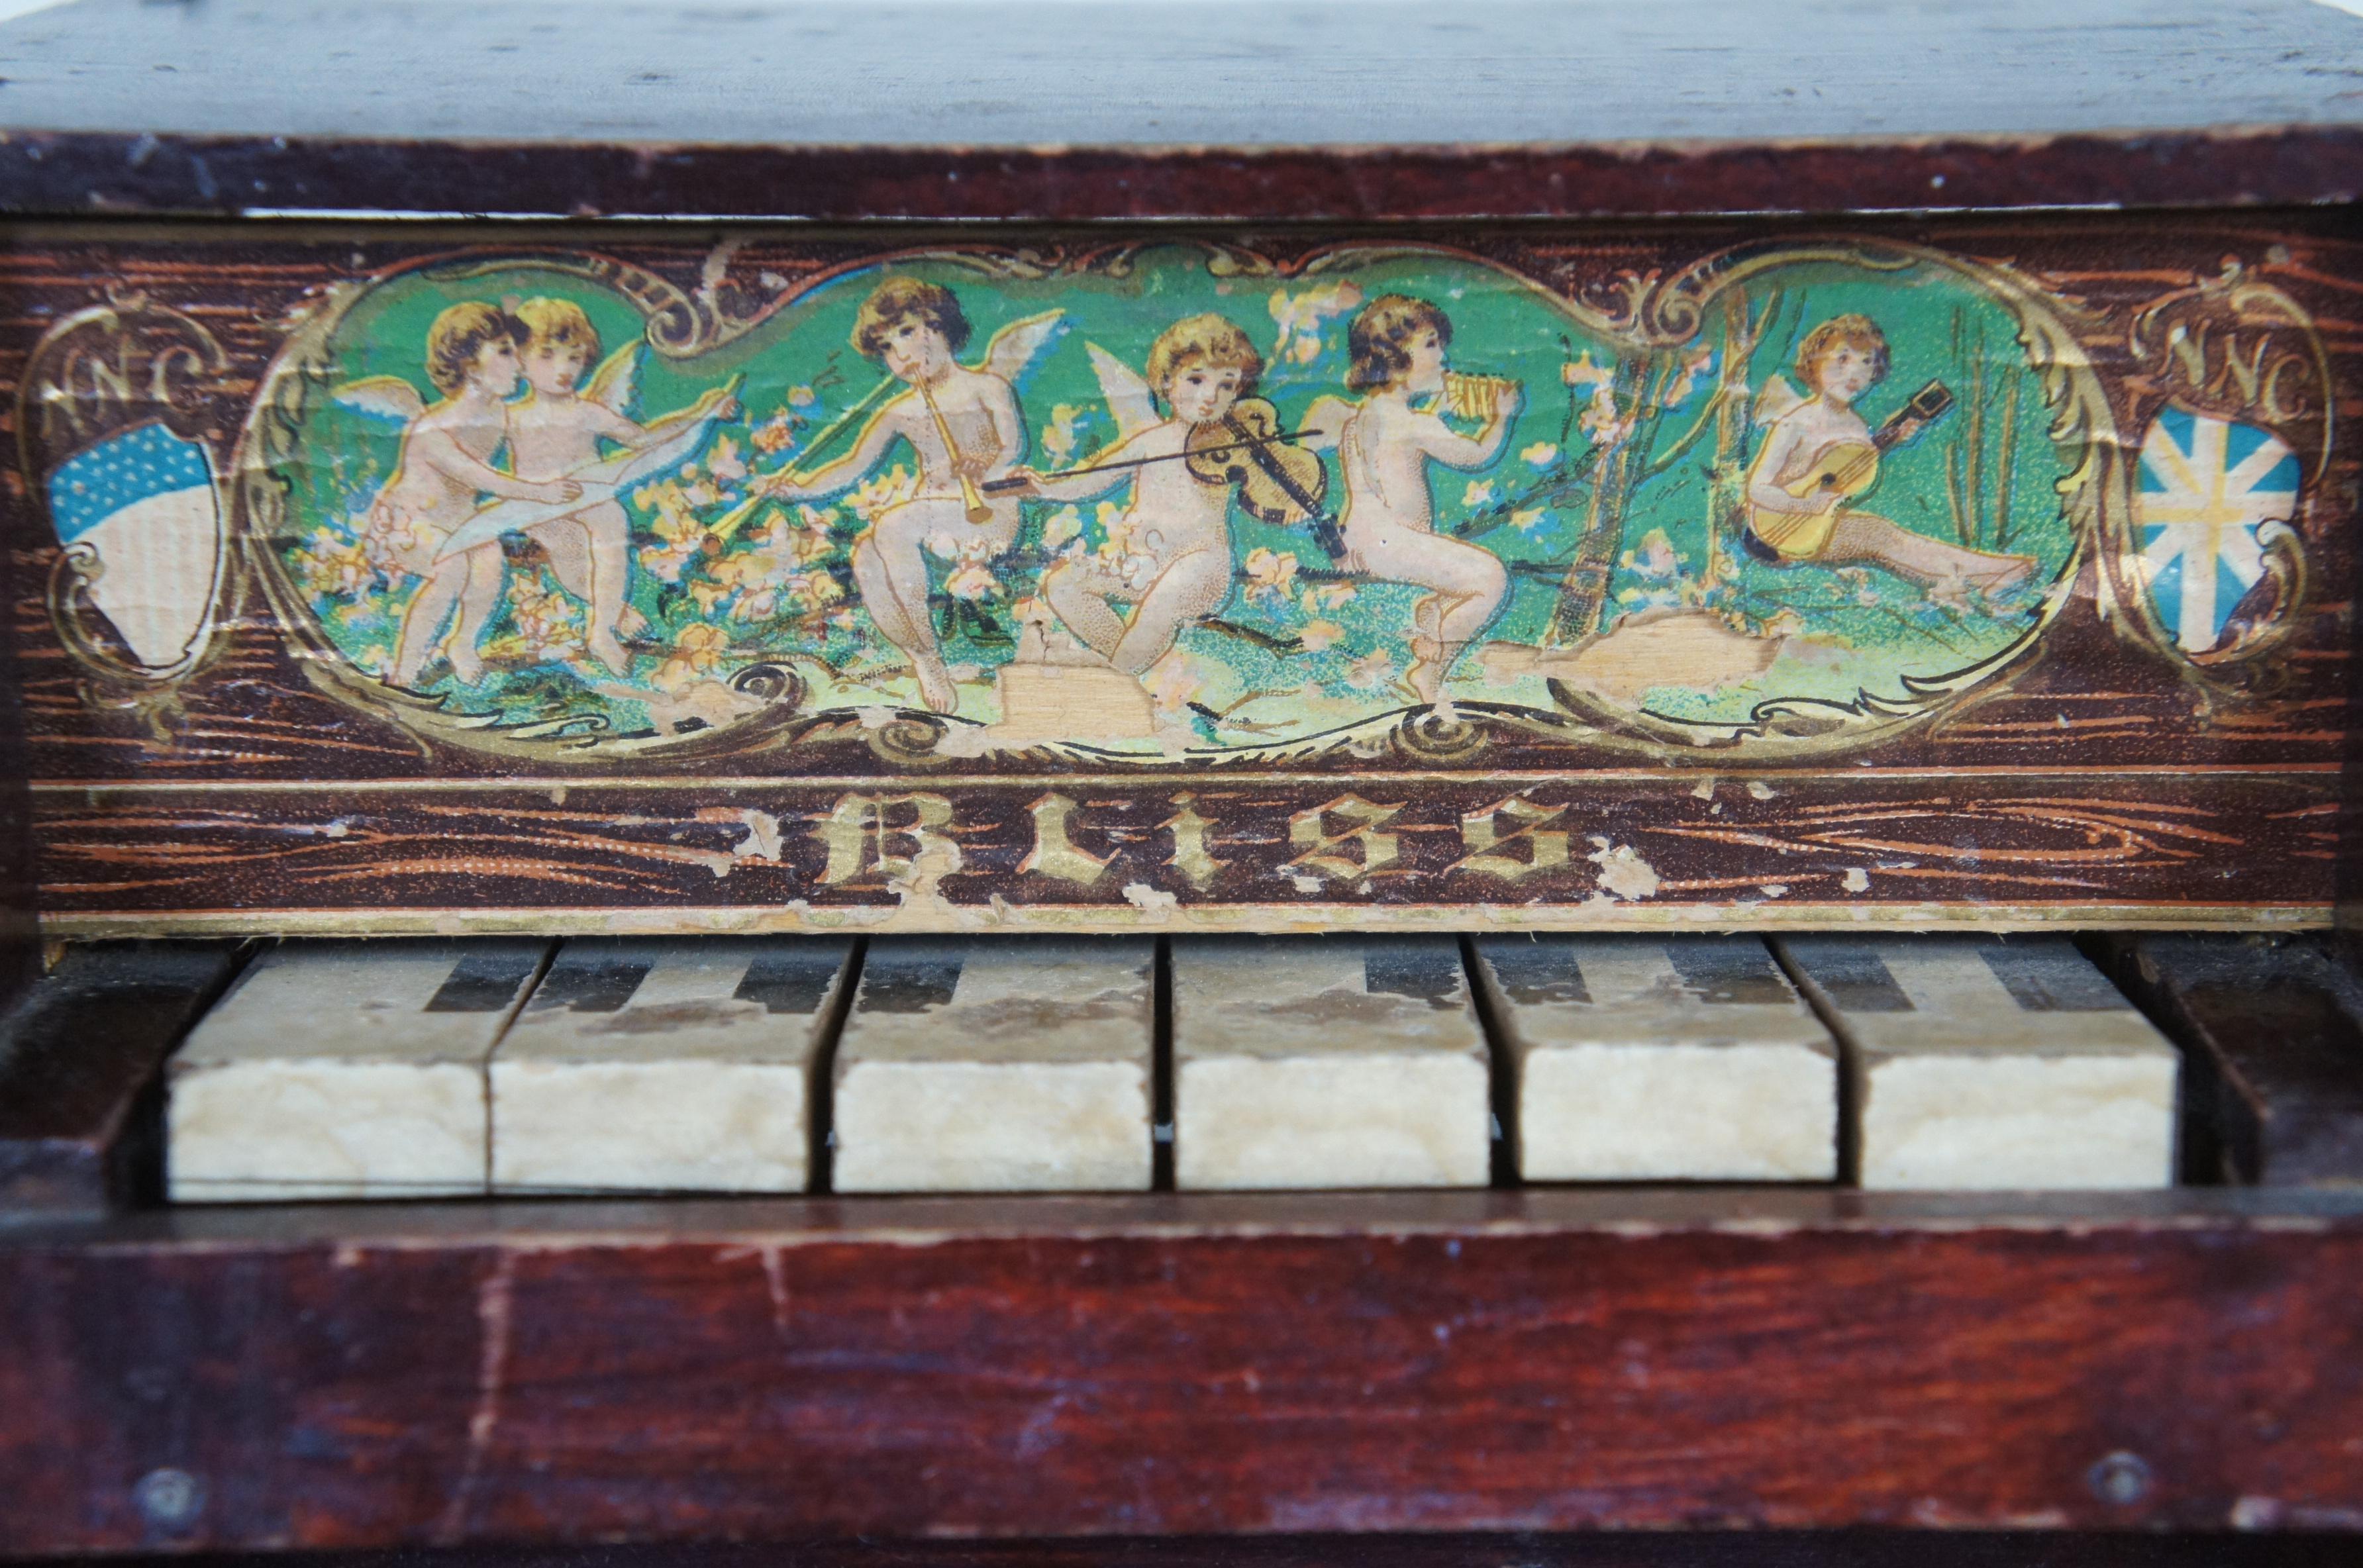 Antique German Bliss Miniature Upright Toy Piano Glockenspiel Lithograph Wood 2